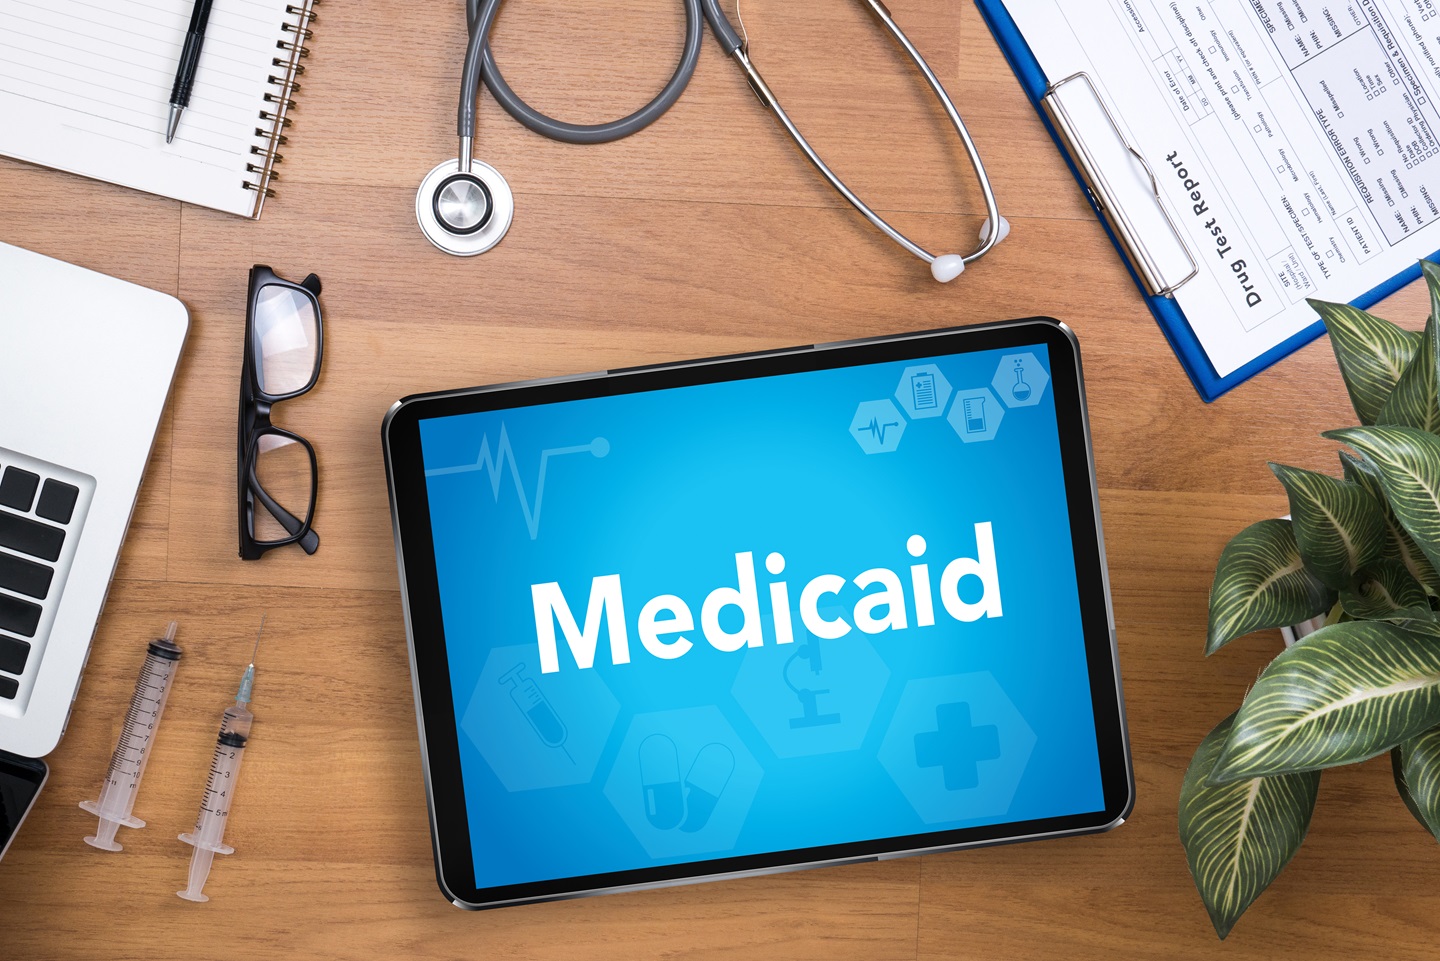 The background is a desk with a notebook, laptop, a pair of glasses, two shots for an injection, in the middle is a tablet screen that says, "Medicaid", and on the top right is a clipboard.